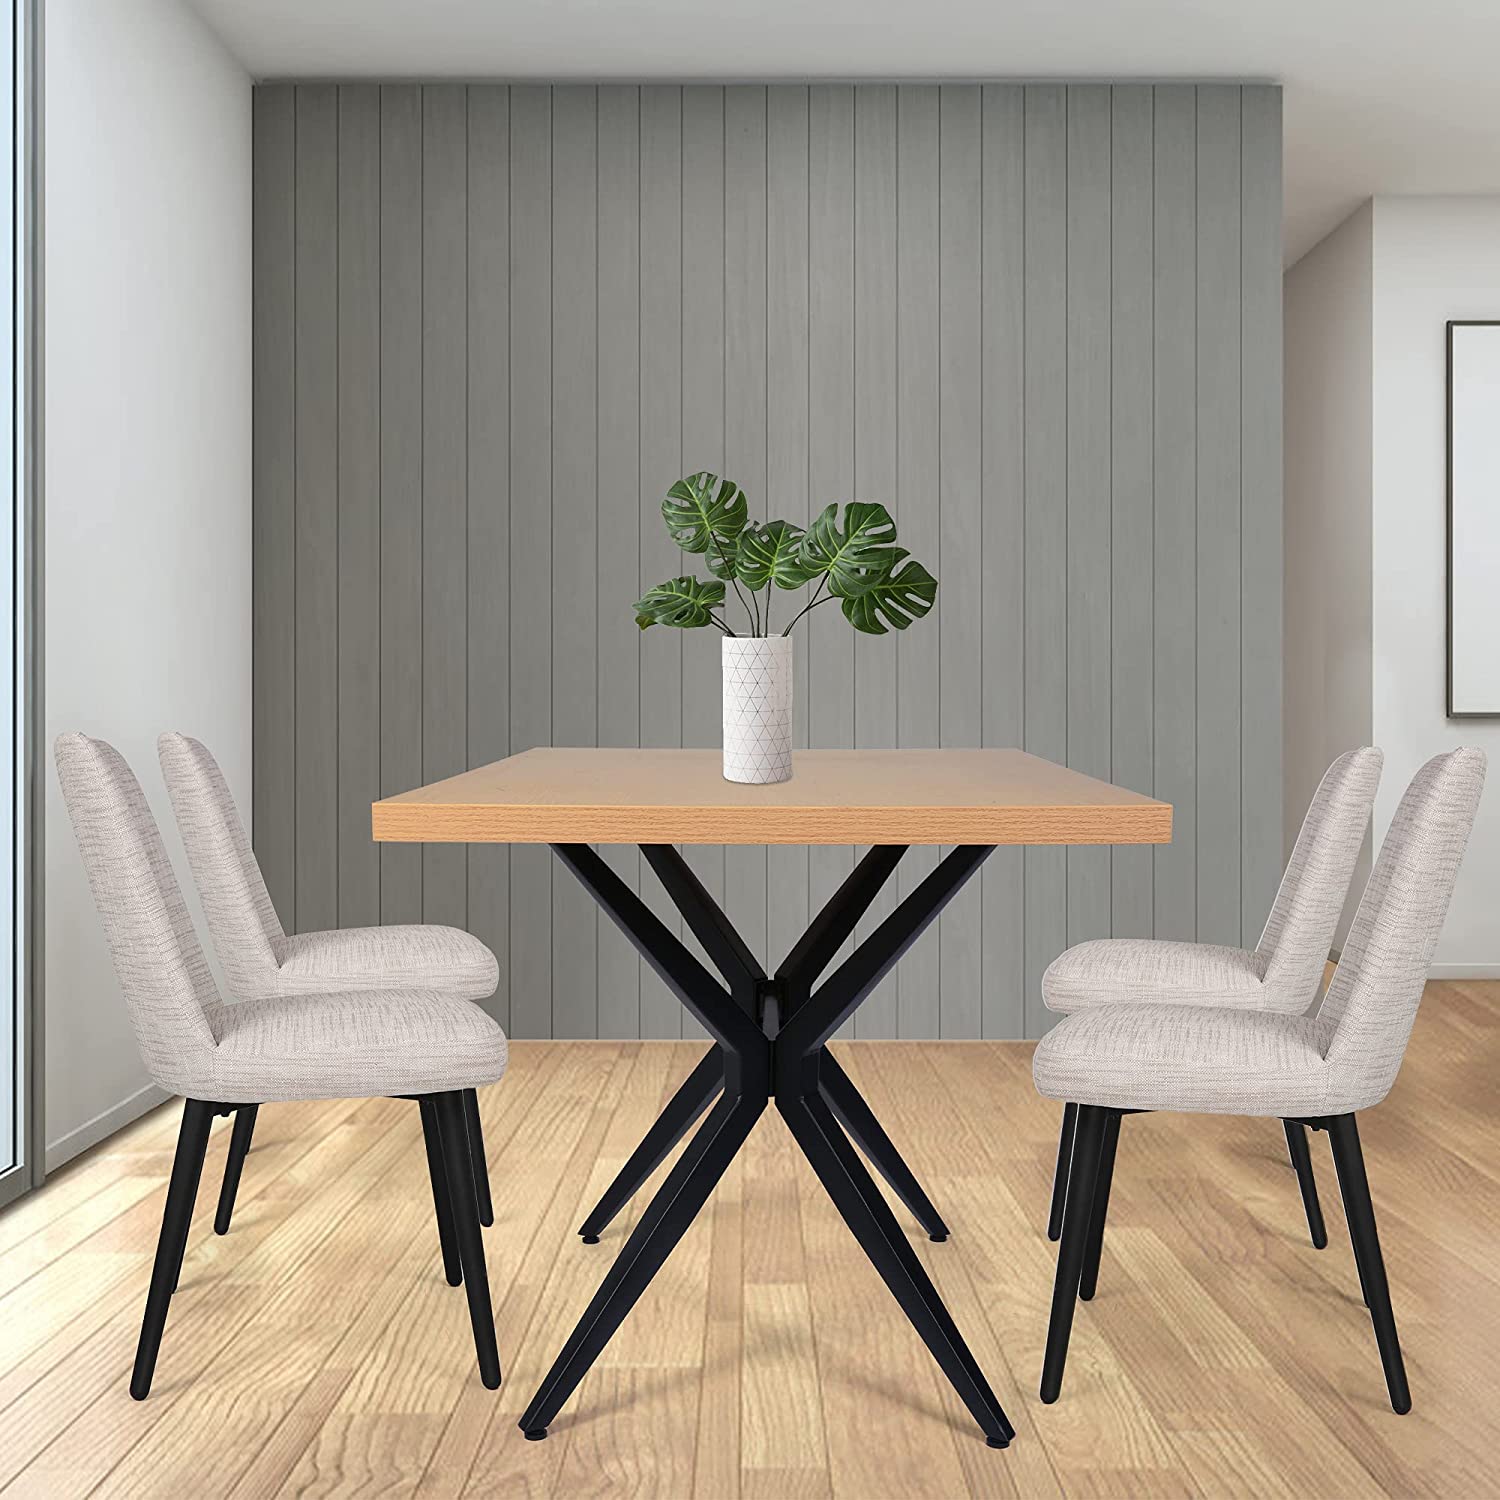 48" x 30" Modern Wooden Dining Table for 4-6 Kitchen Table with Metal Legs